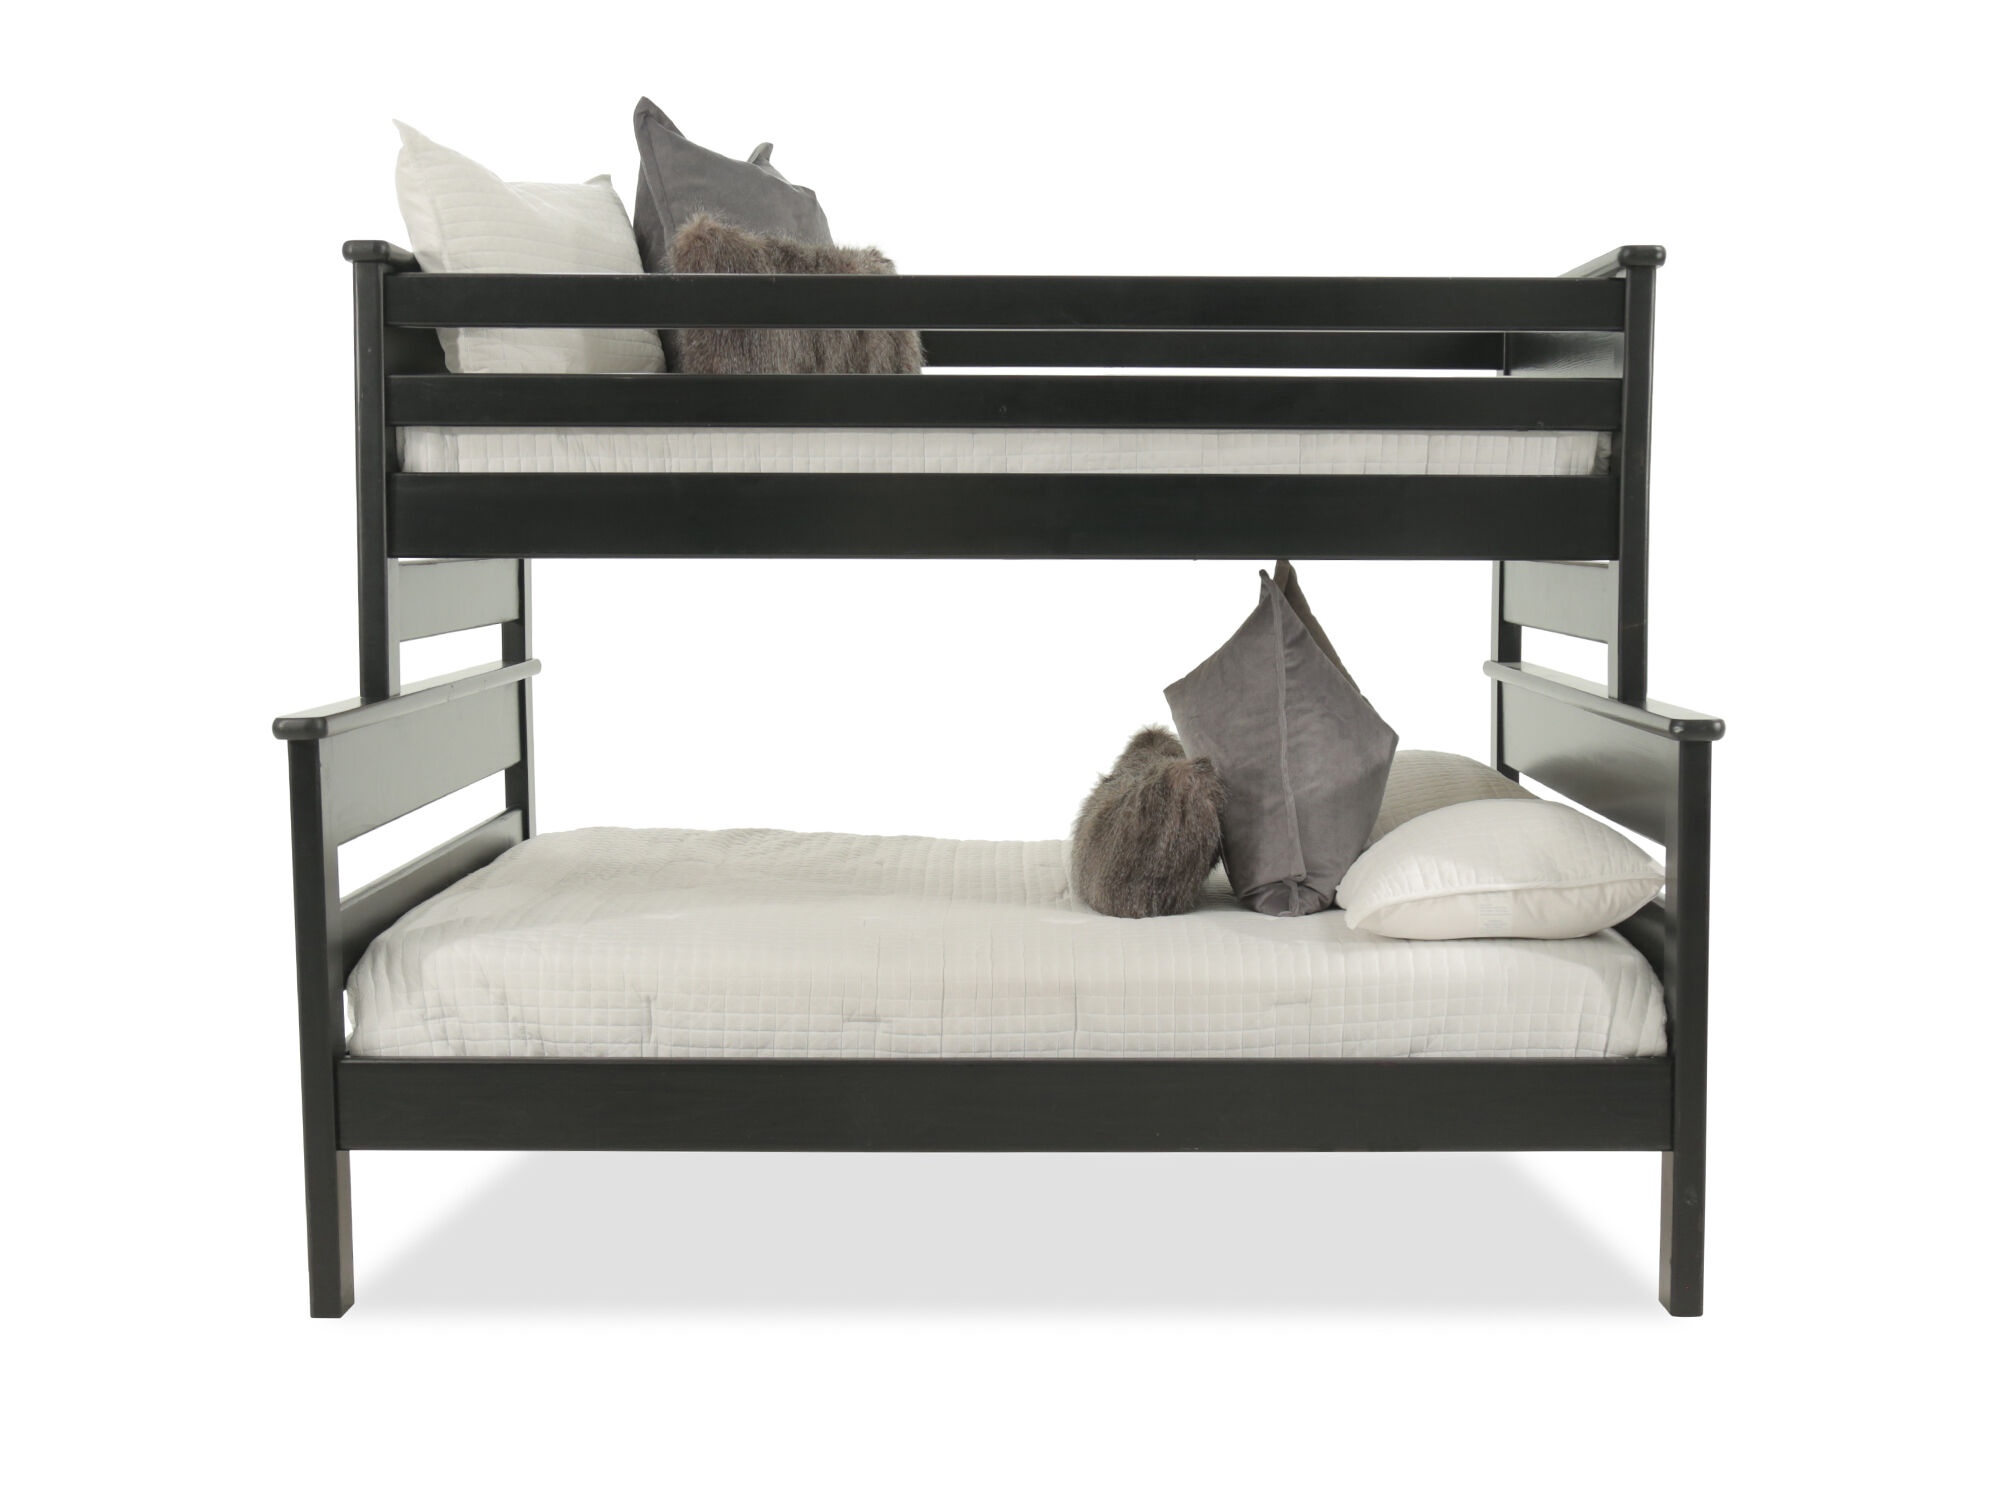 Transitional Youth Twin Over Full Bunk, Trendwood Twin Bed